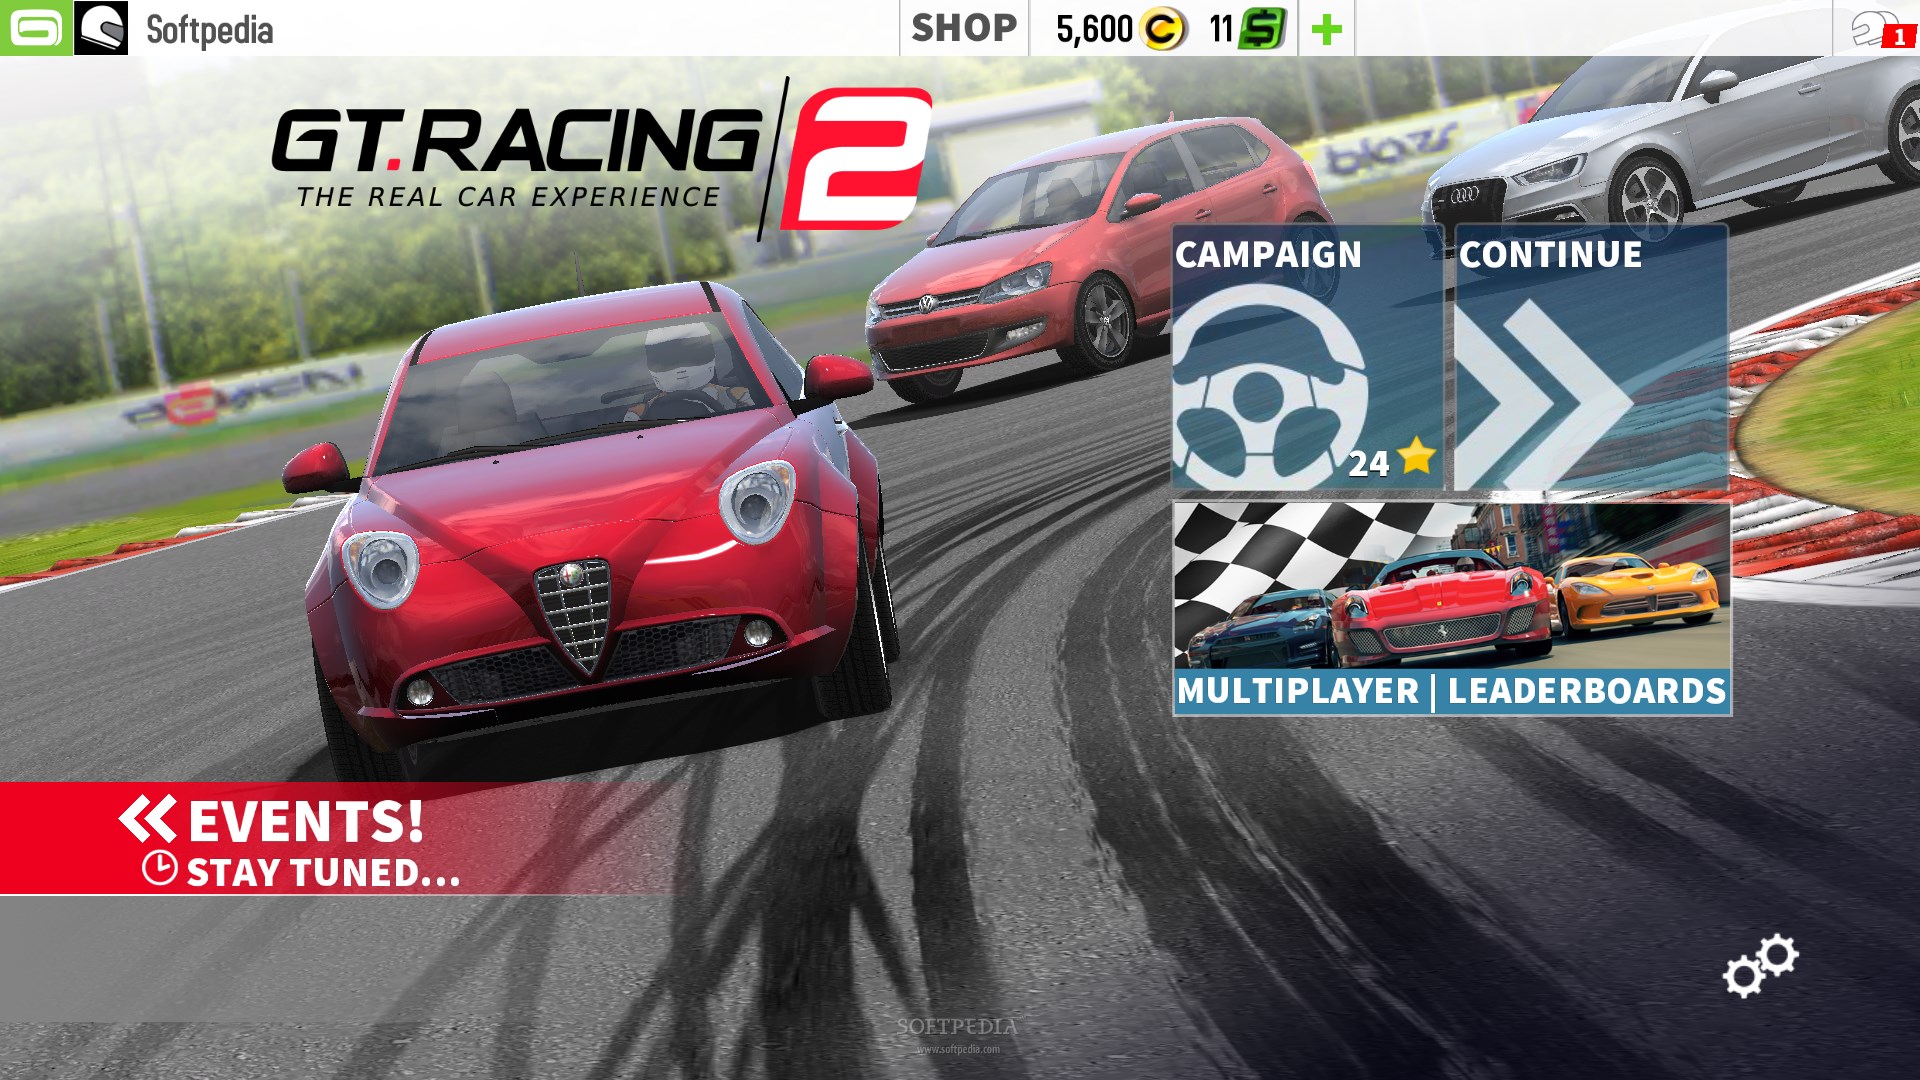 gt racing 2: the real car experience windows 10